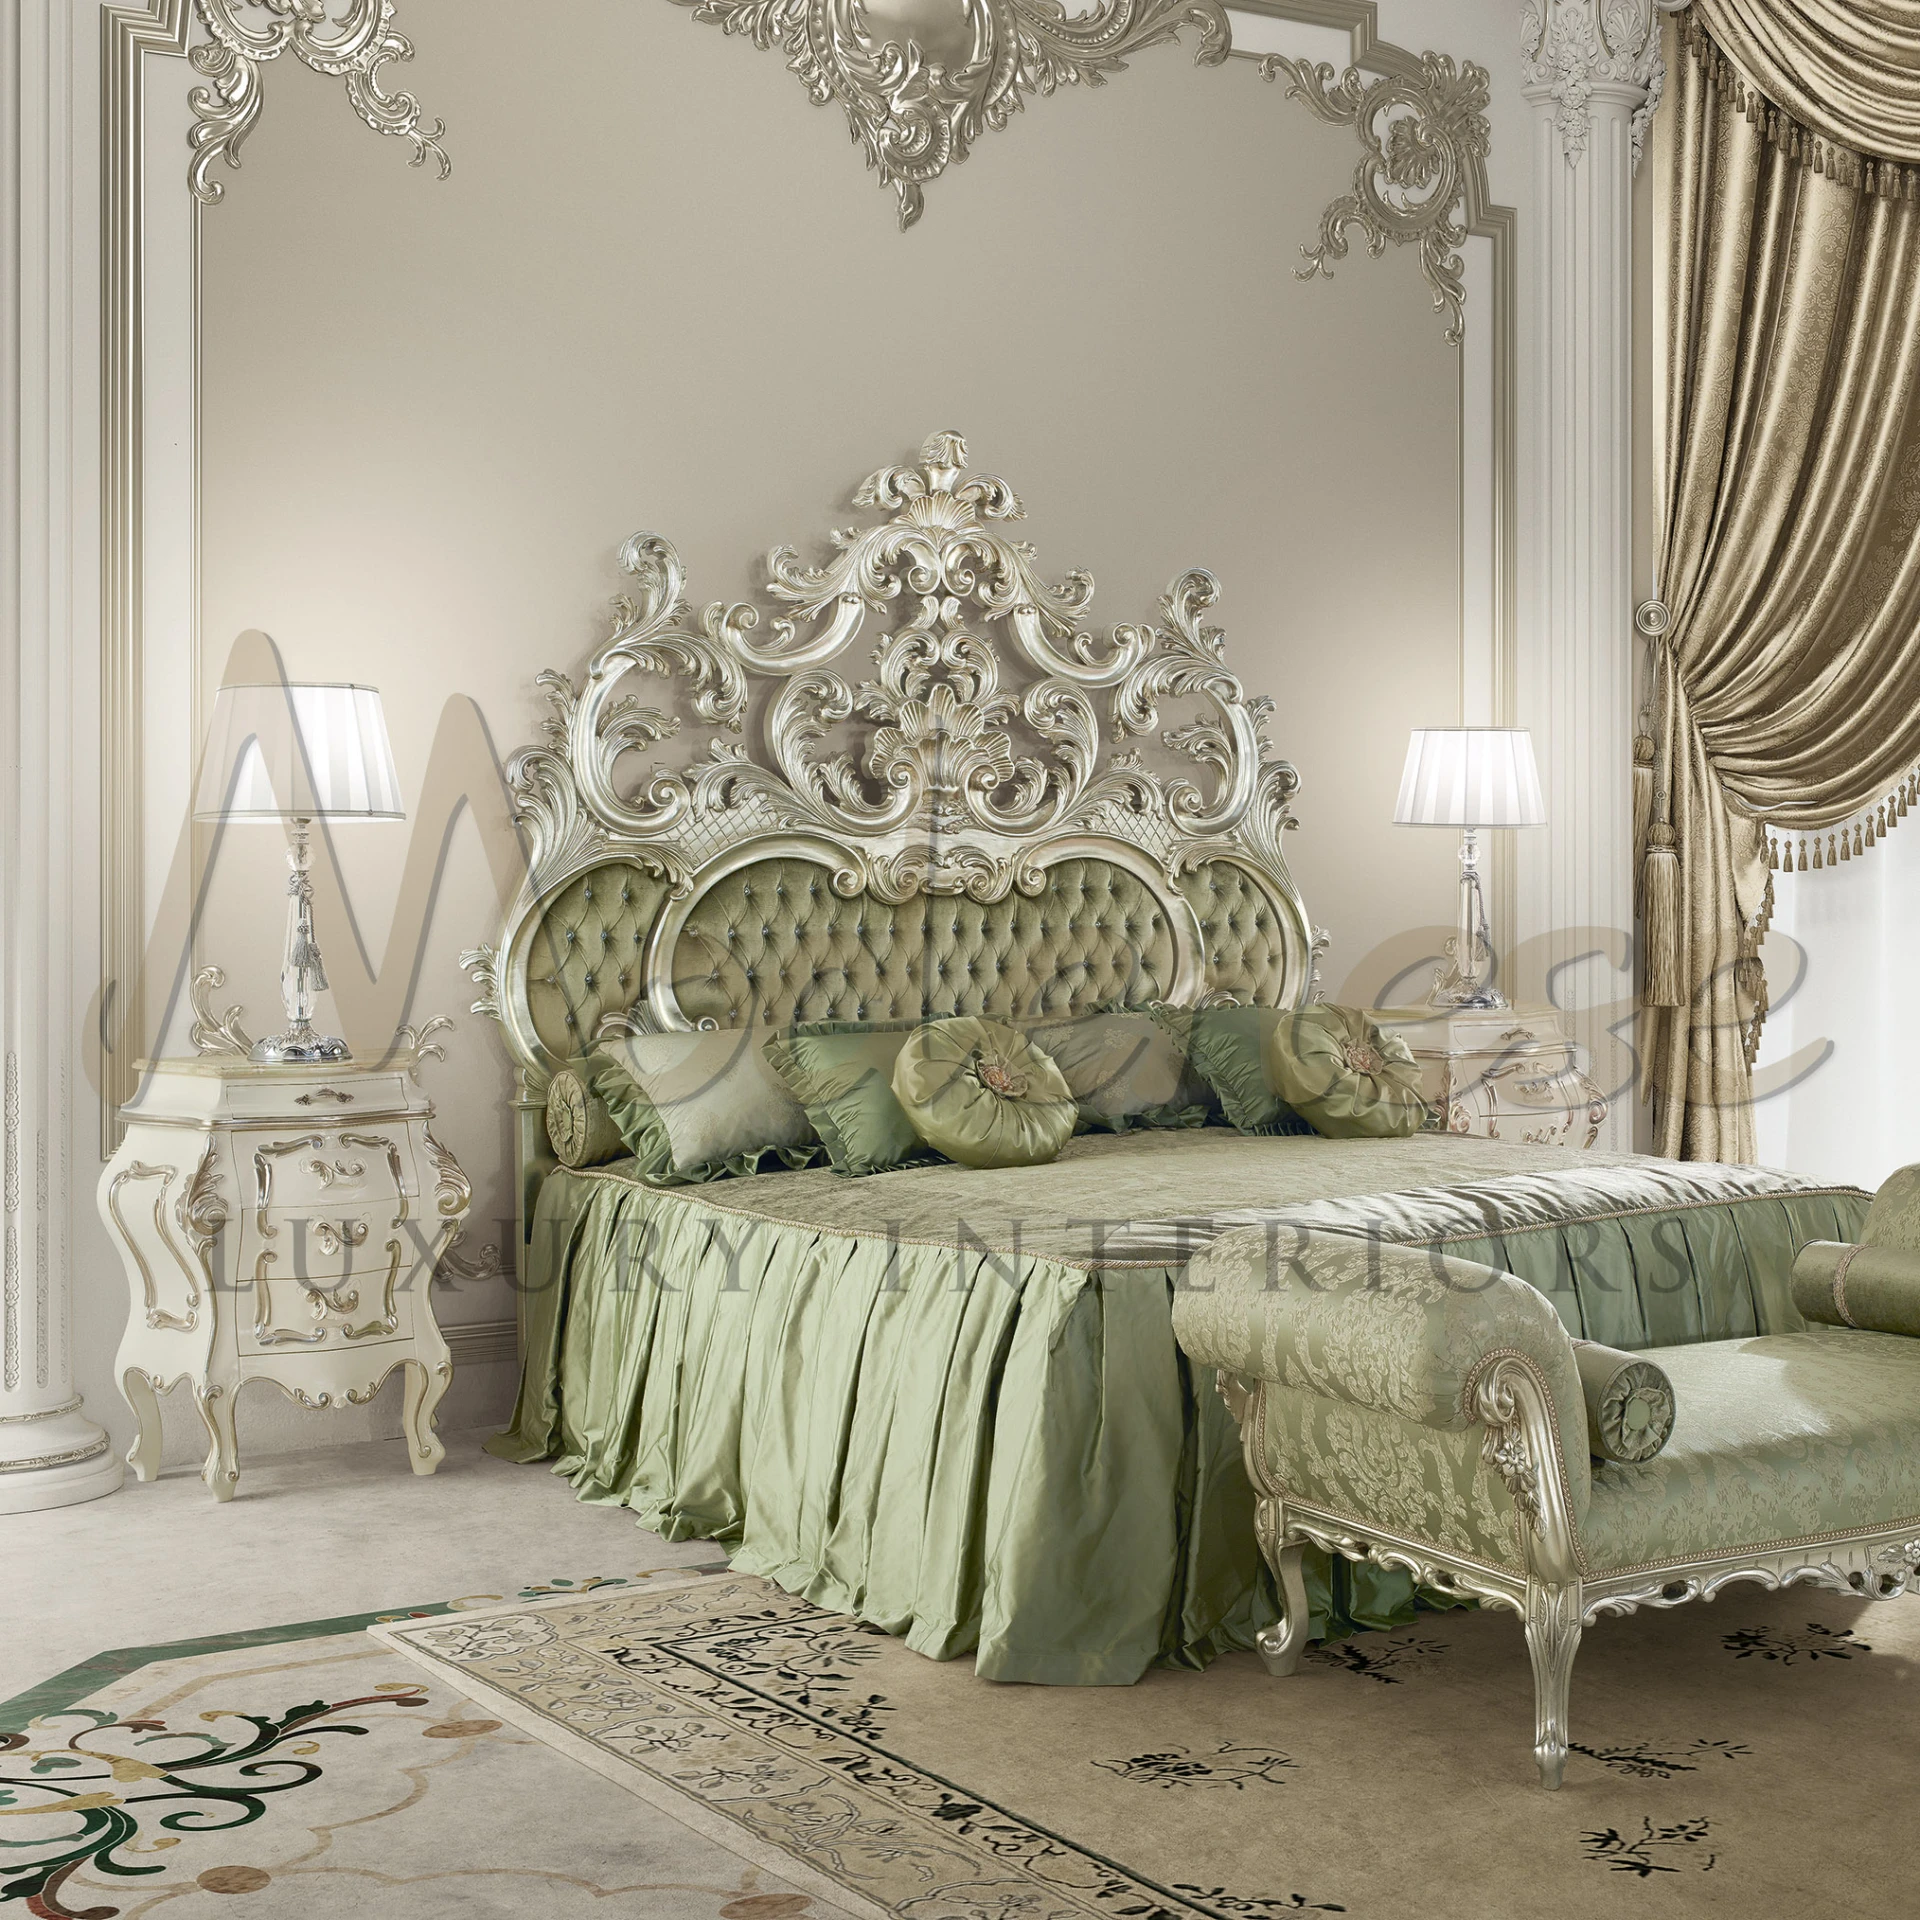 Sumptuous Modenese bedroom set with a grand baroque headboard, elegant green silk bedding, ornate nightstands, and classical table lamps. 100% made in Italy.